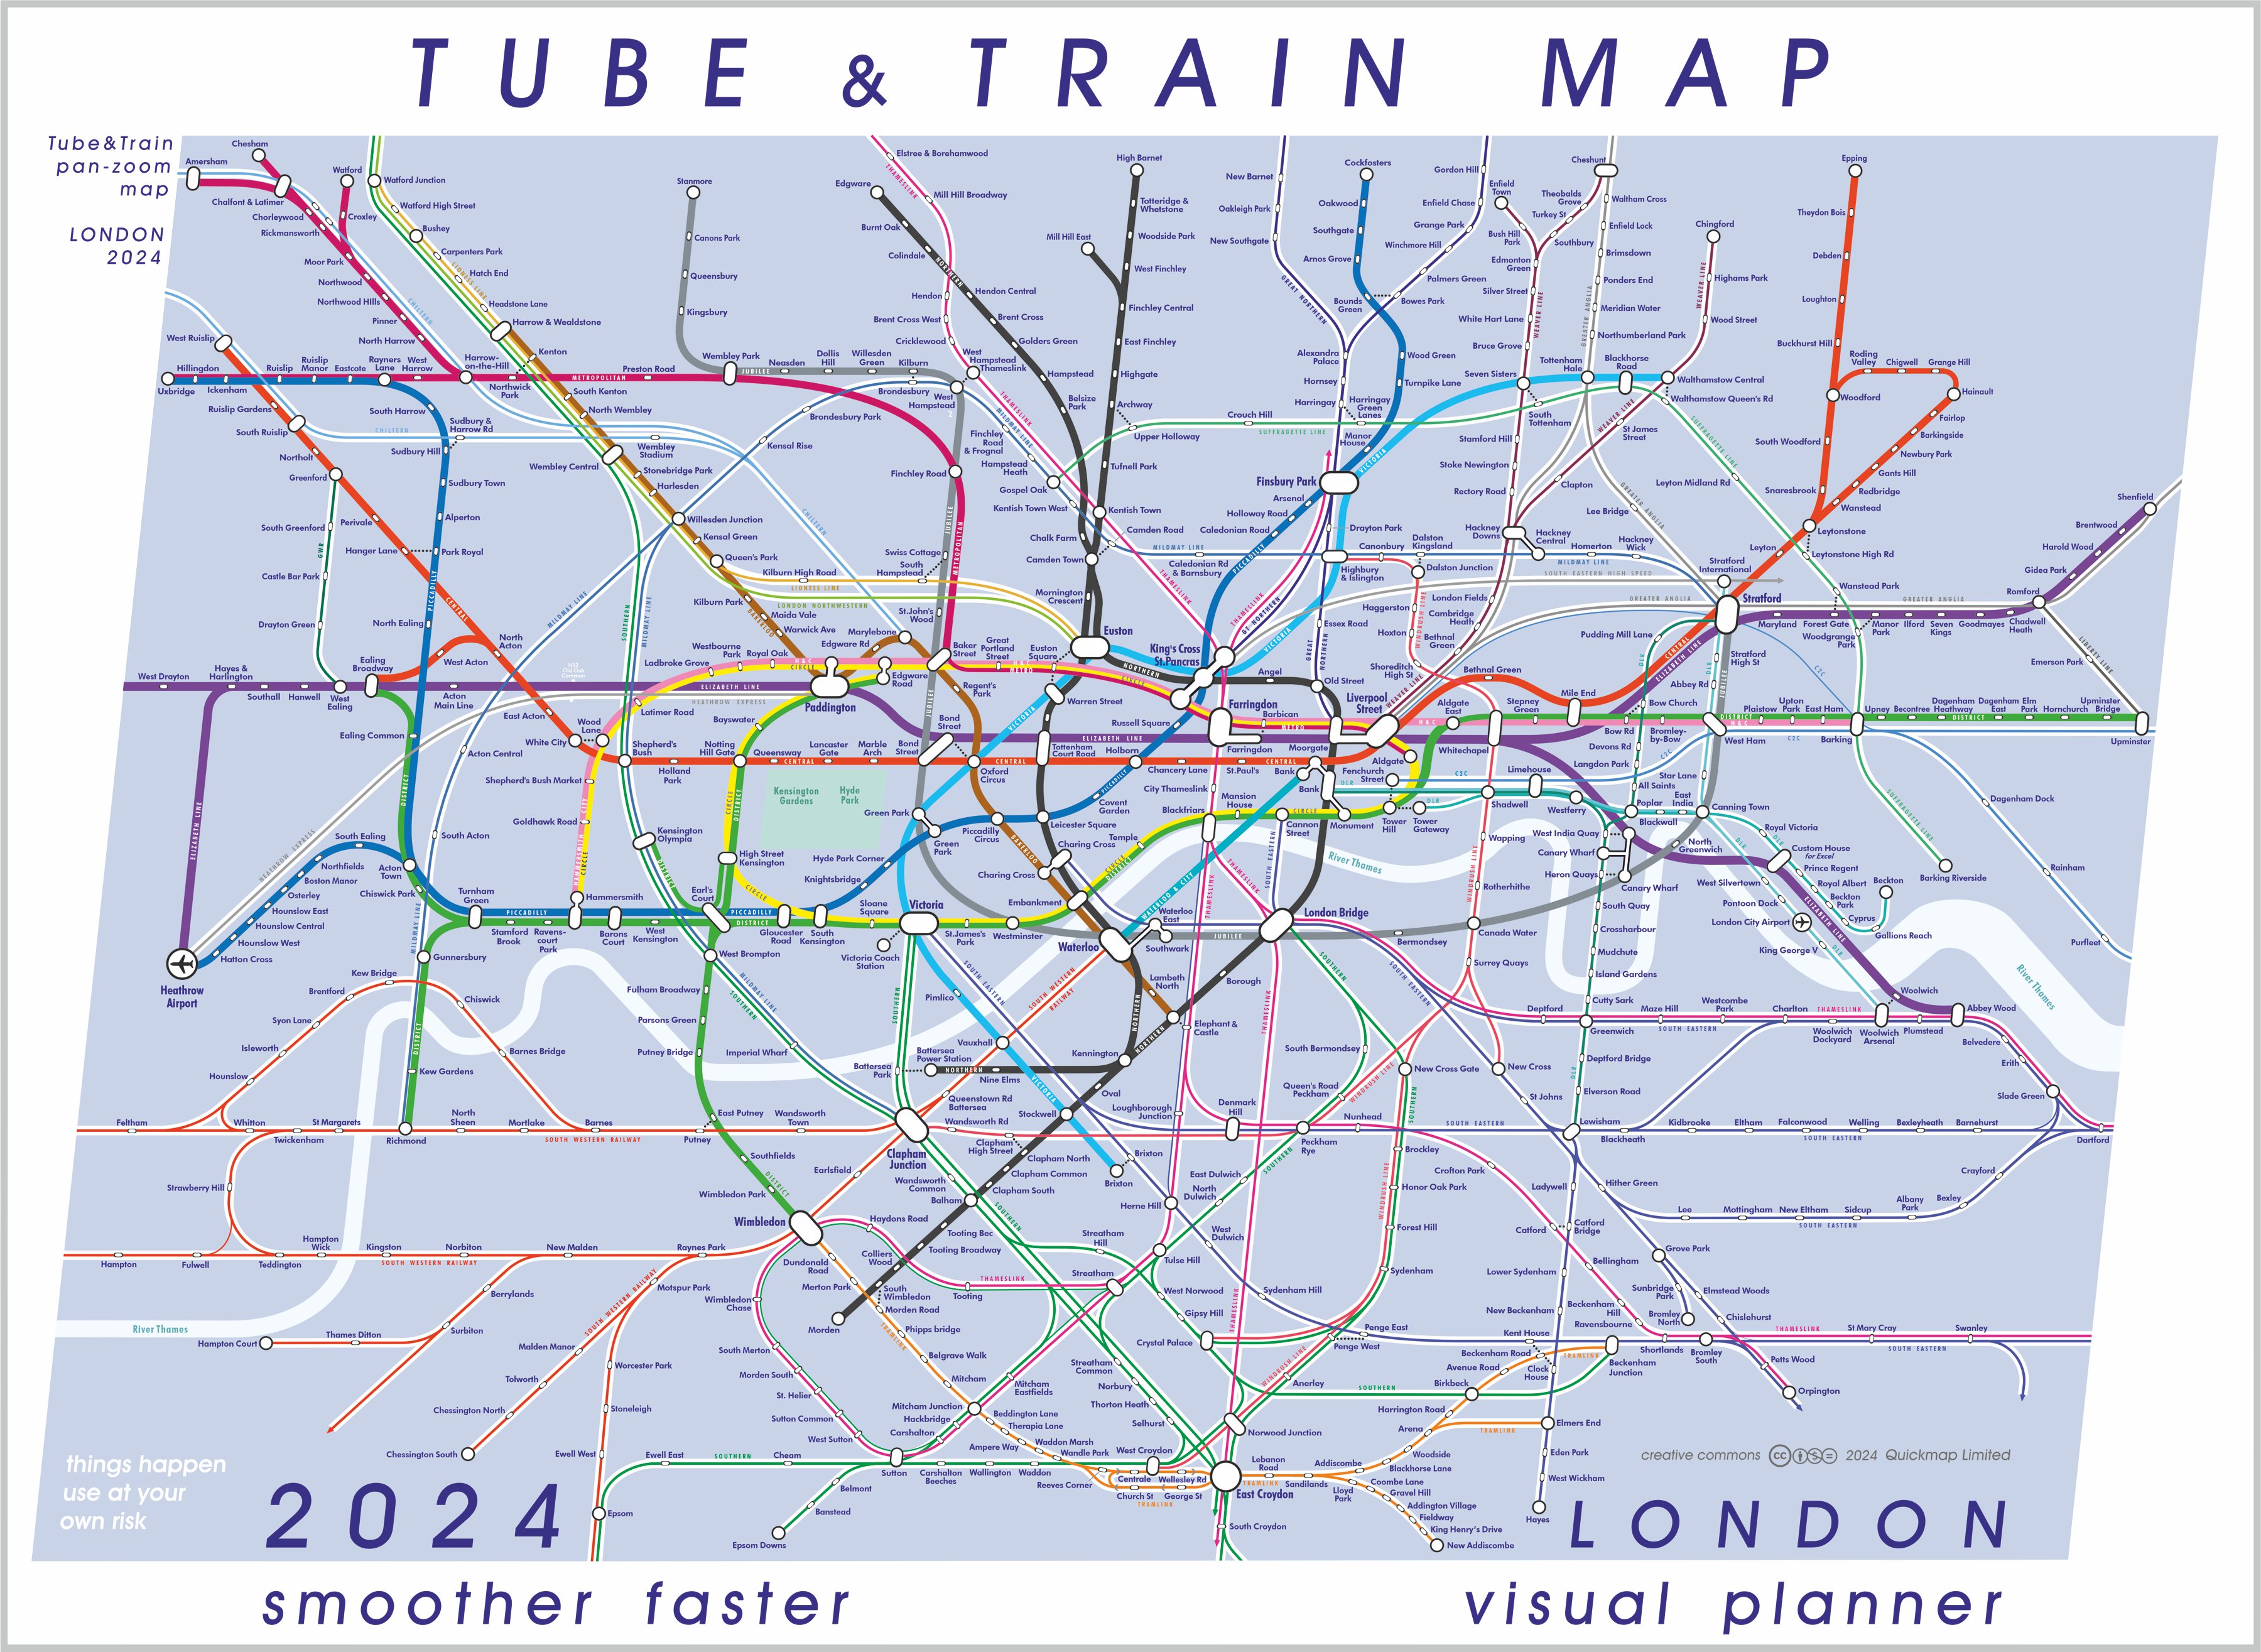 London underground tube map, rail map and tram map combined